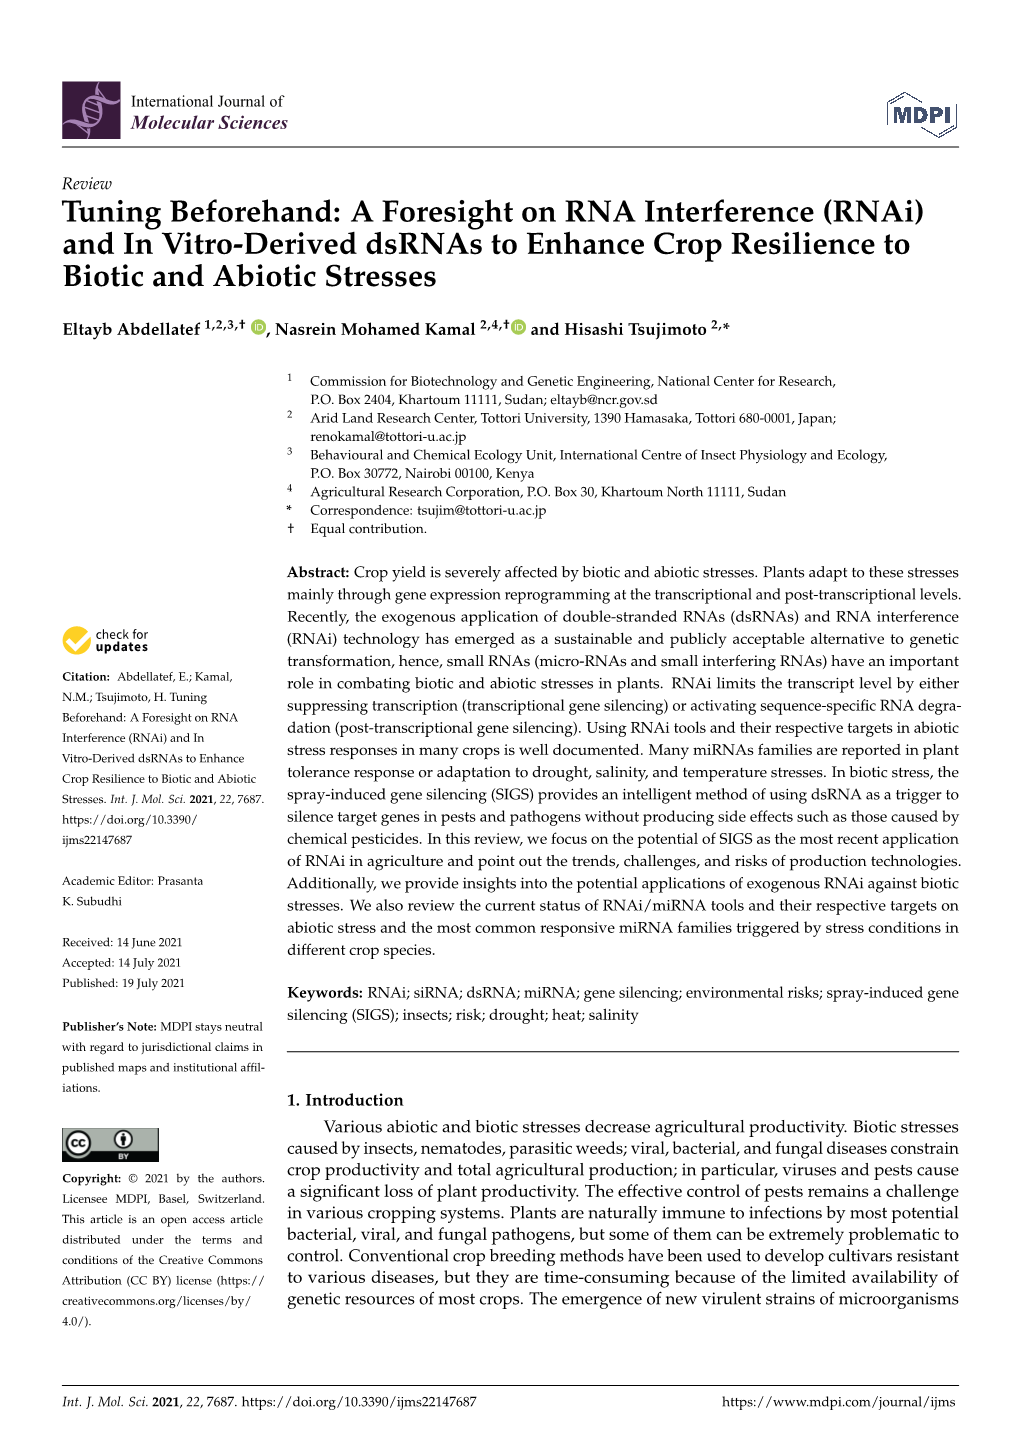 Tuning Beforehand: a Foresight on RNA Interference (Rnai) and in Vitro-Derived Dsrnas to Enhance Crop Resilience to Biotic and Abiotic Stresses